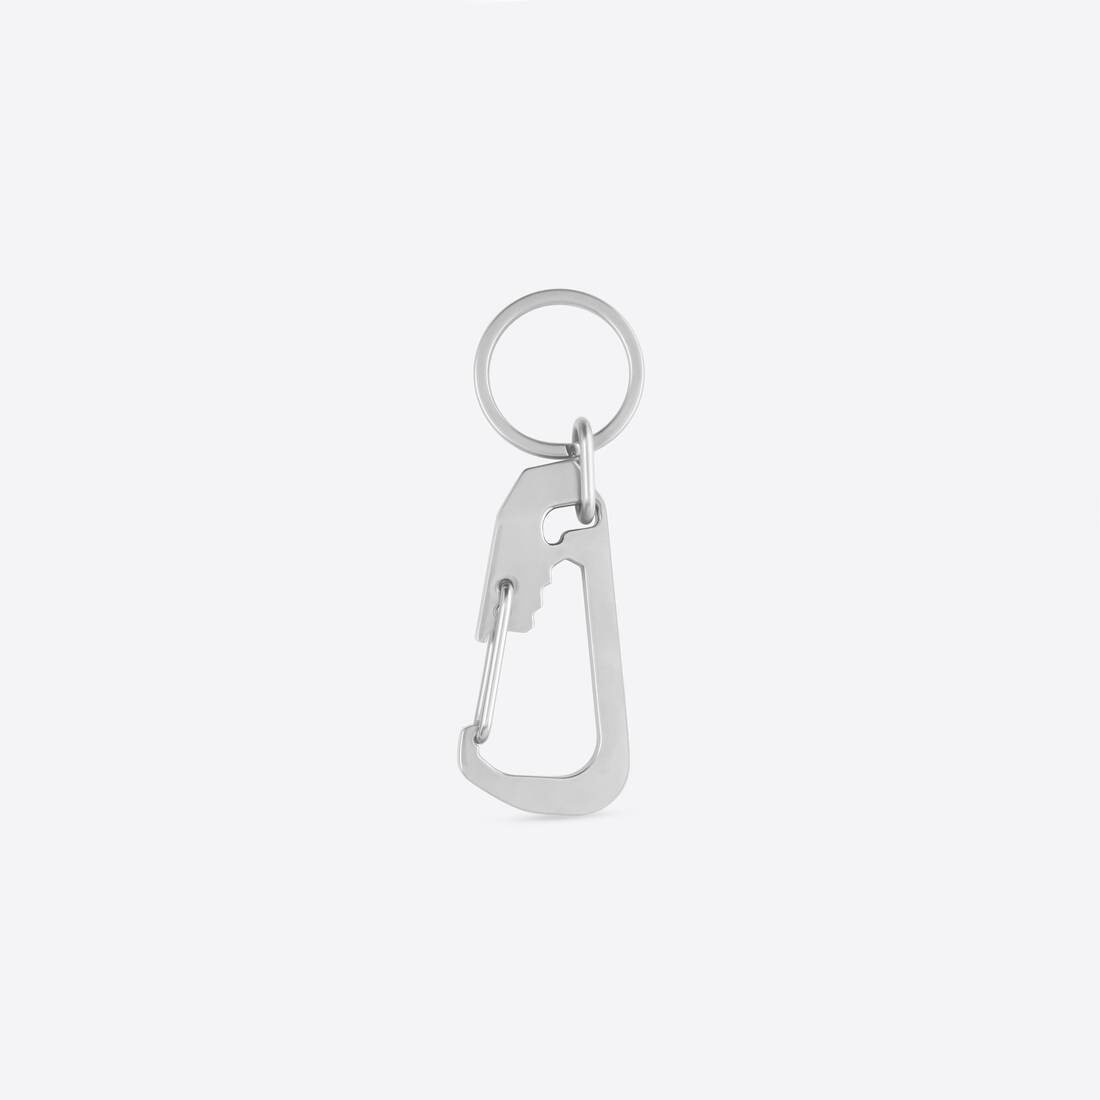 Space Keychain in Silver - 2